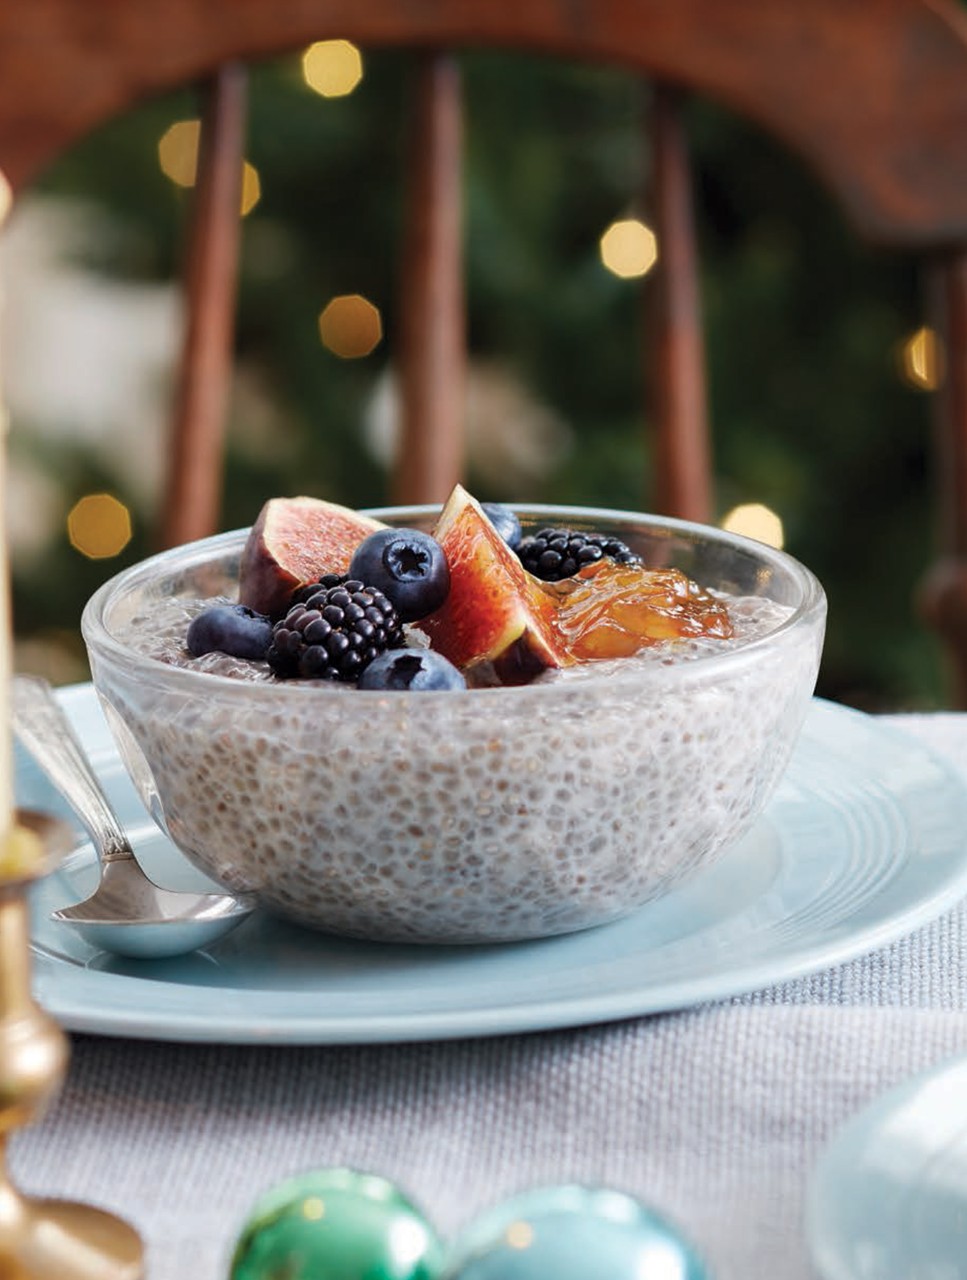 Almond-Horchata-Chia Pudding with Dark Fruits